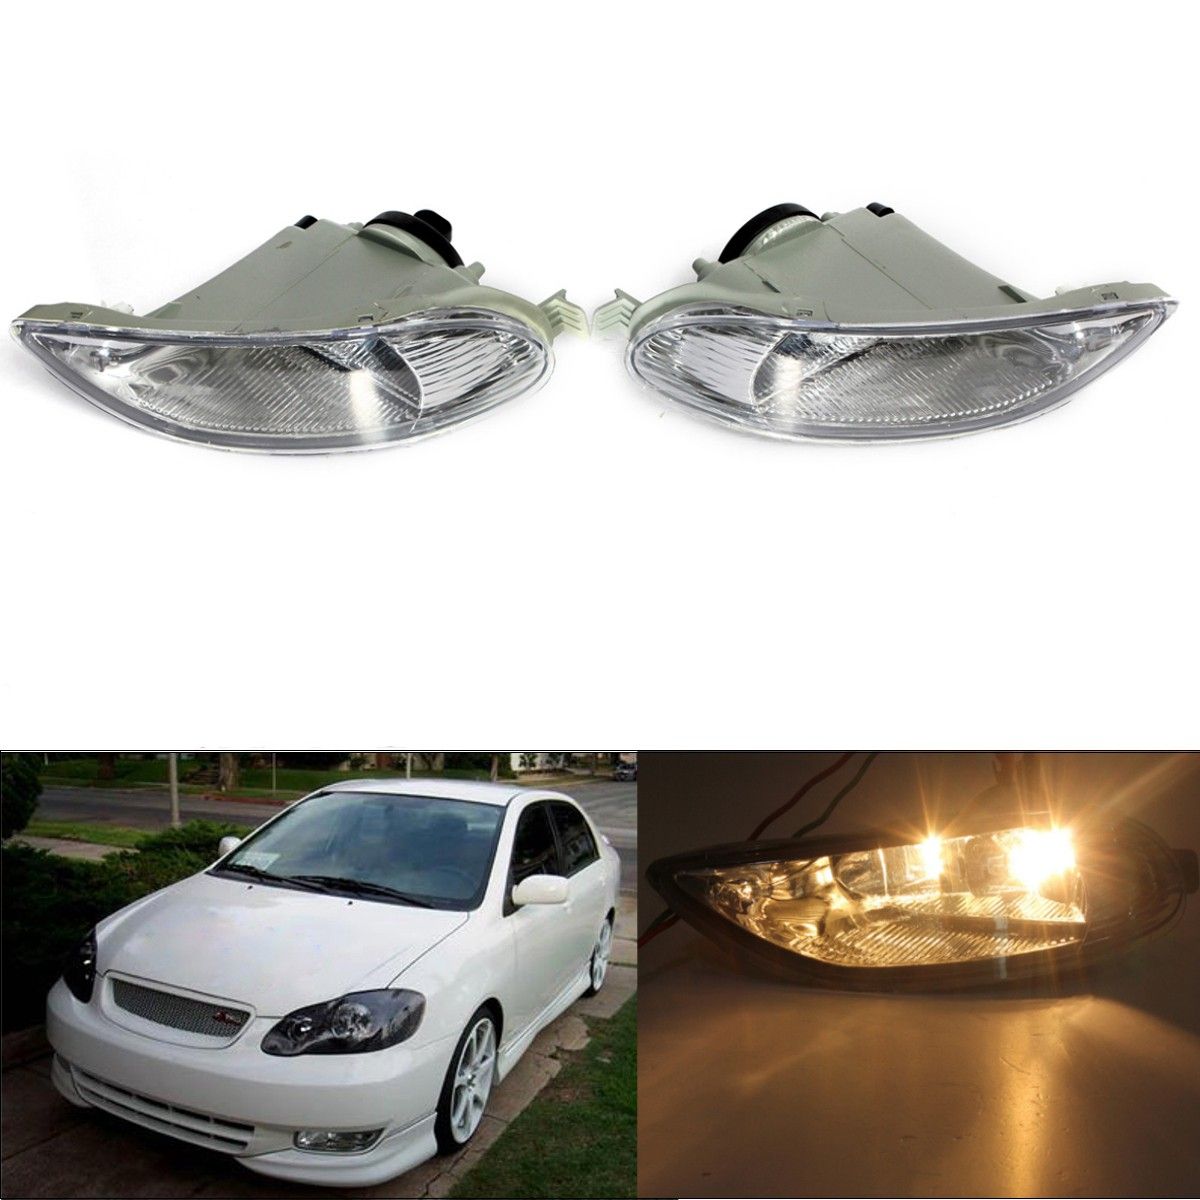 Car-Bumper-Fog-Lights-Front-Lamps-Left-Right-For-Toyota-Corolla-05-08-1010558